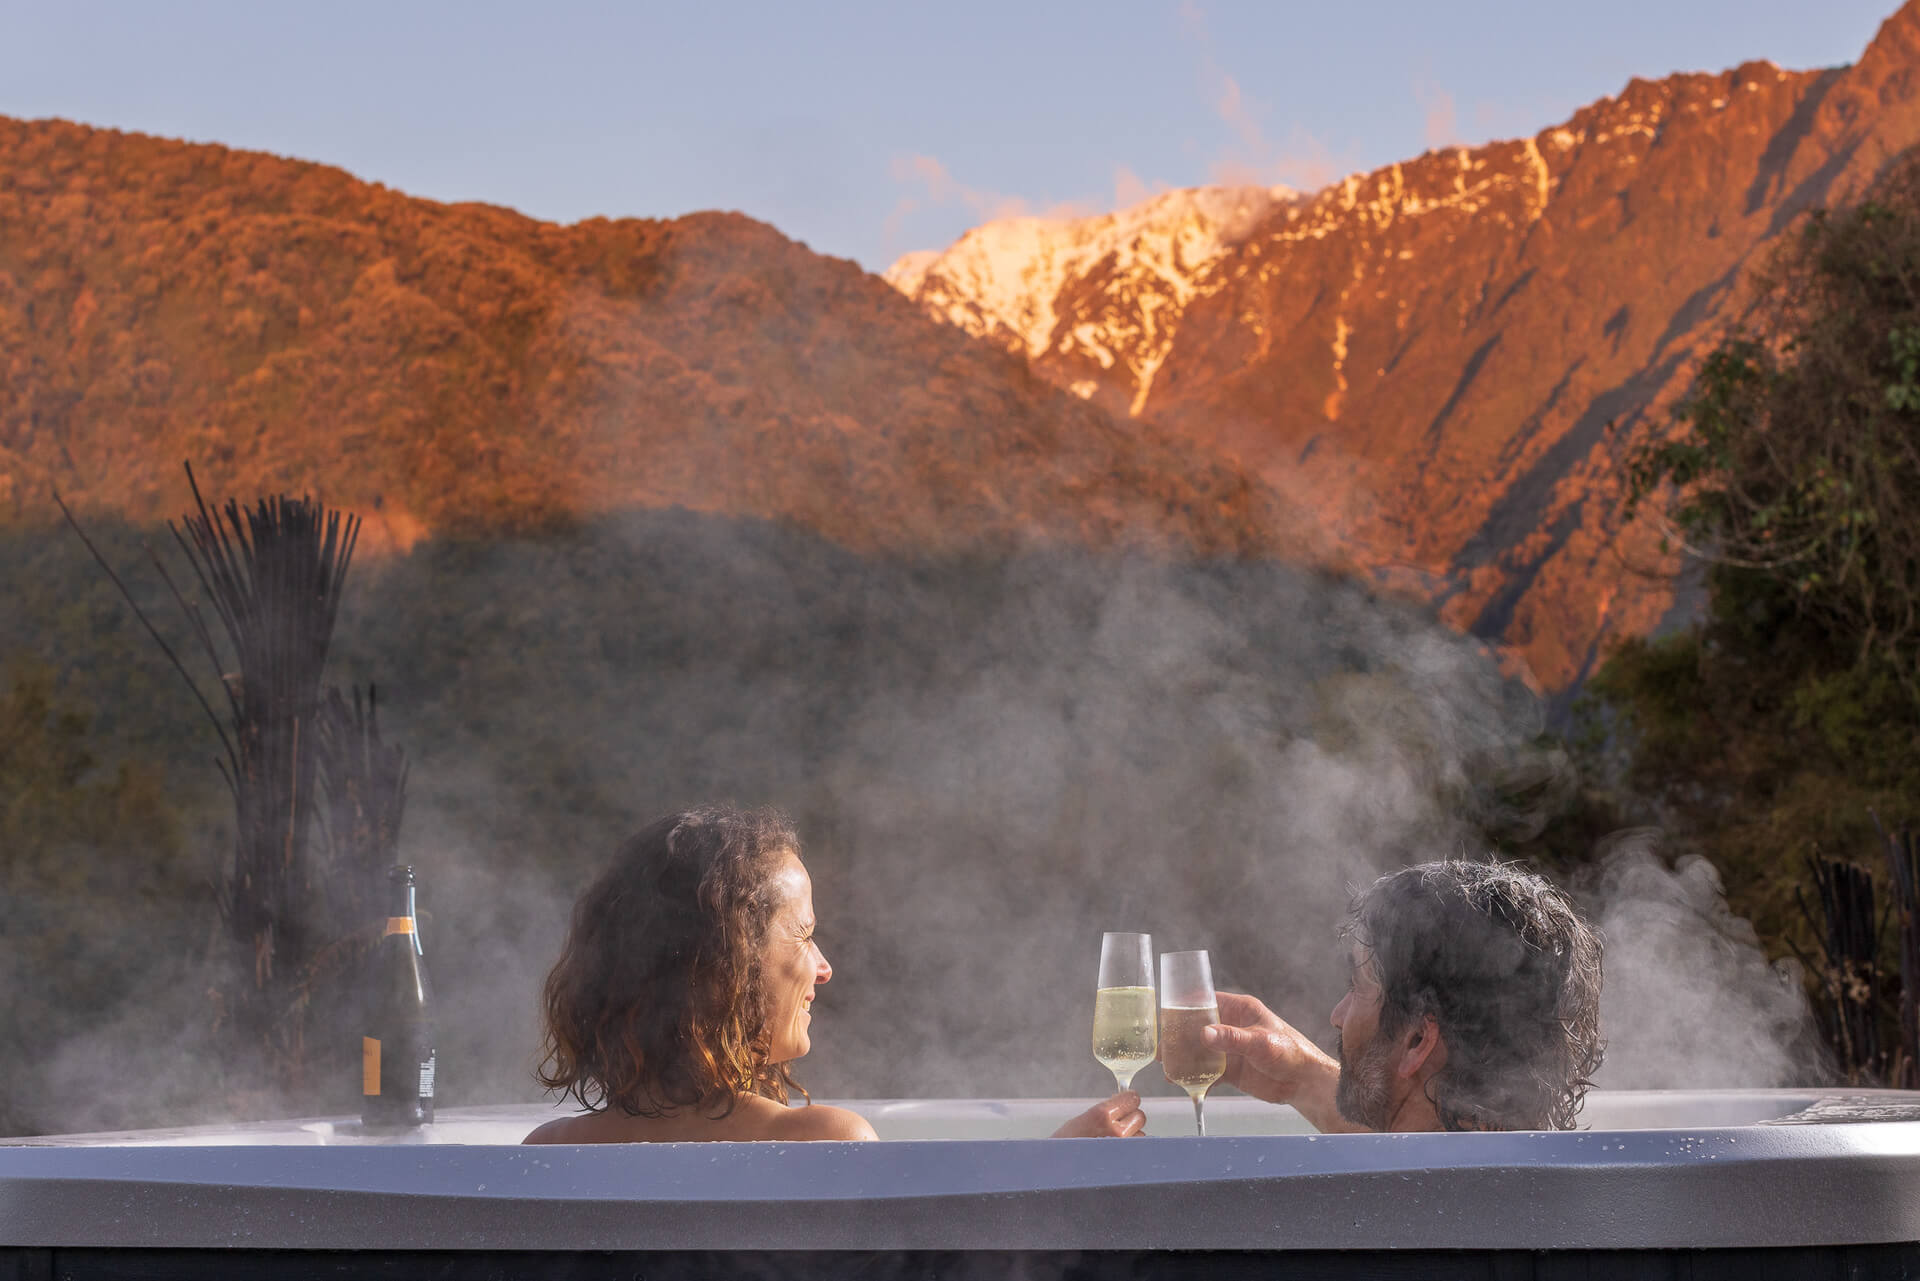 Guests enjoying a wine in the spa looking at the snowy mountain range behind them